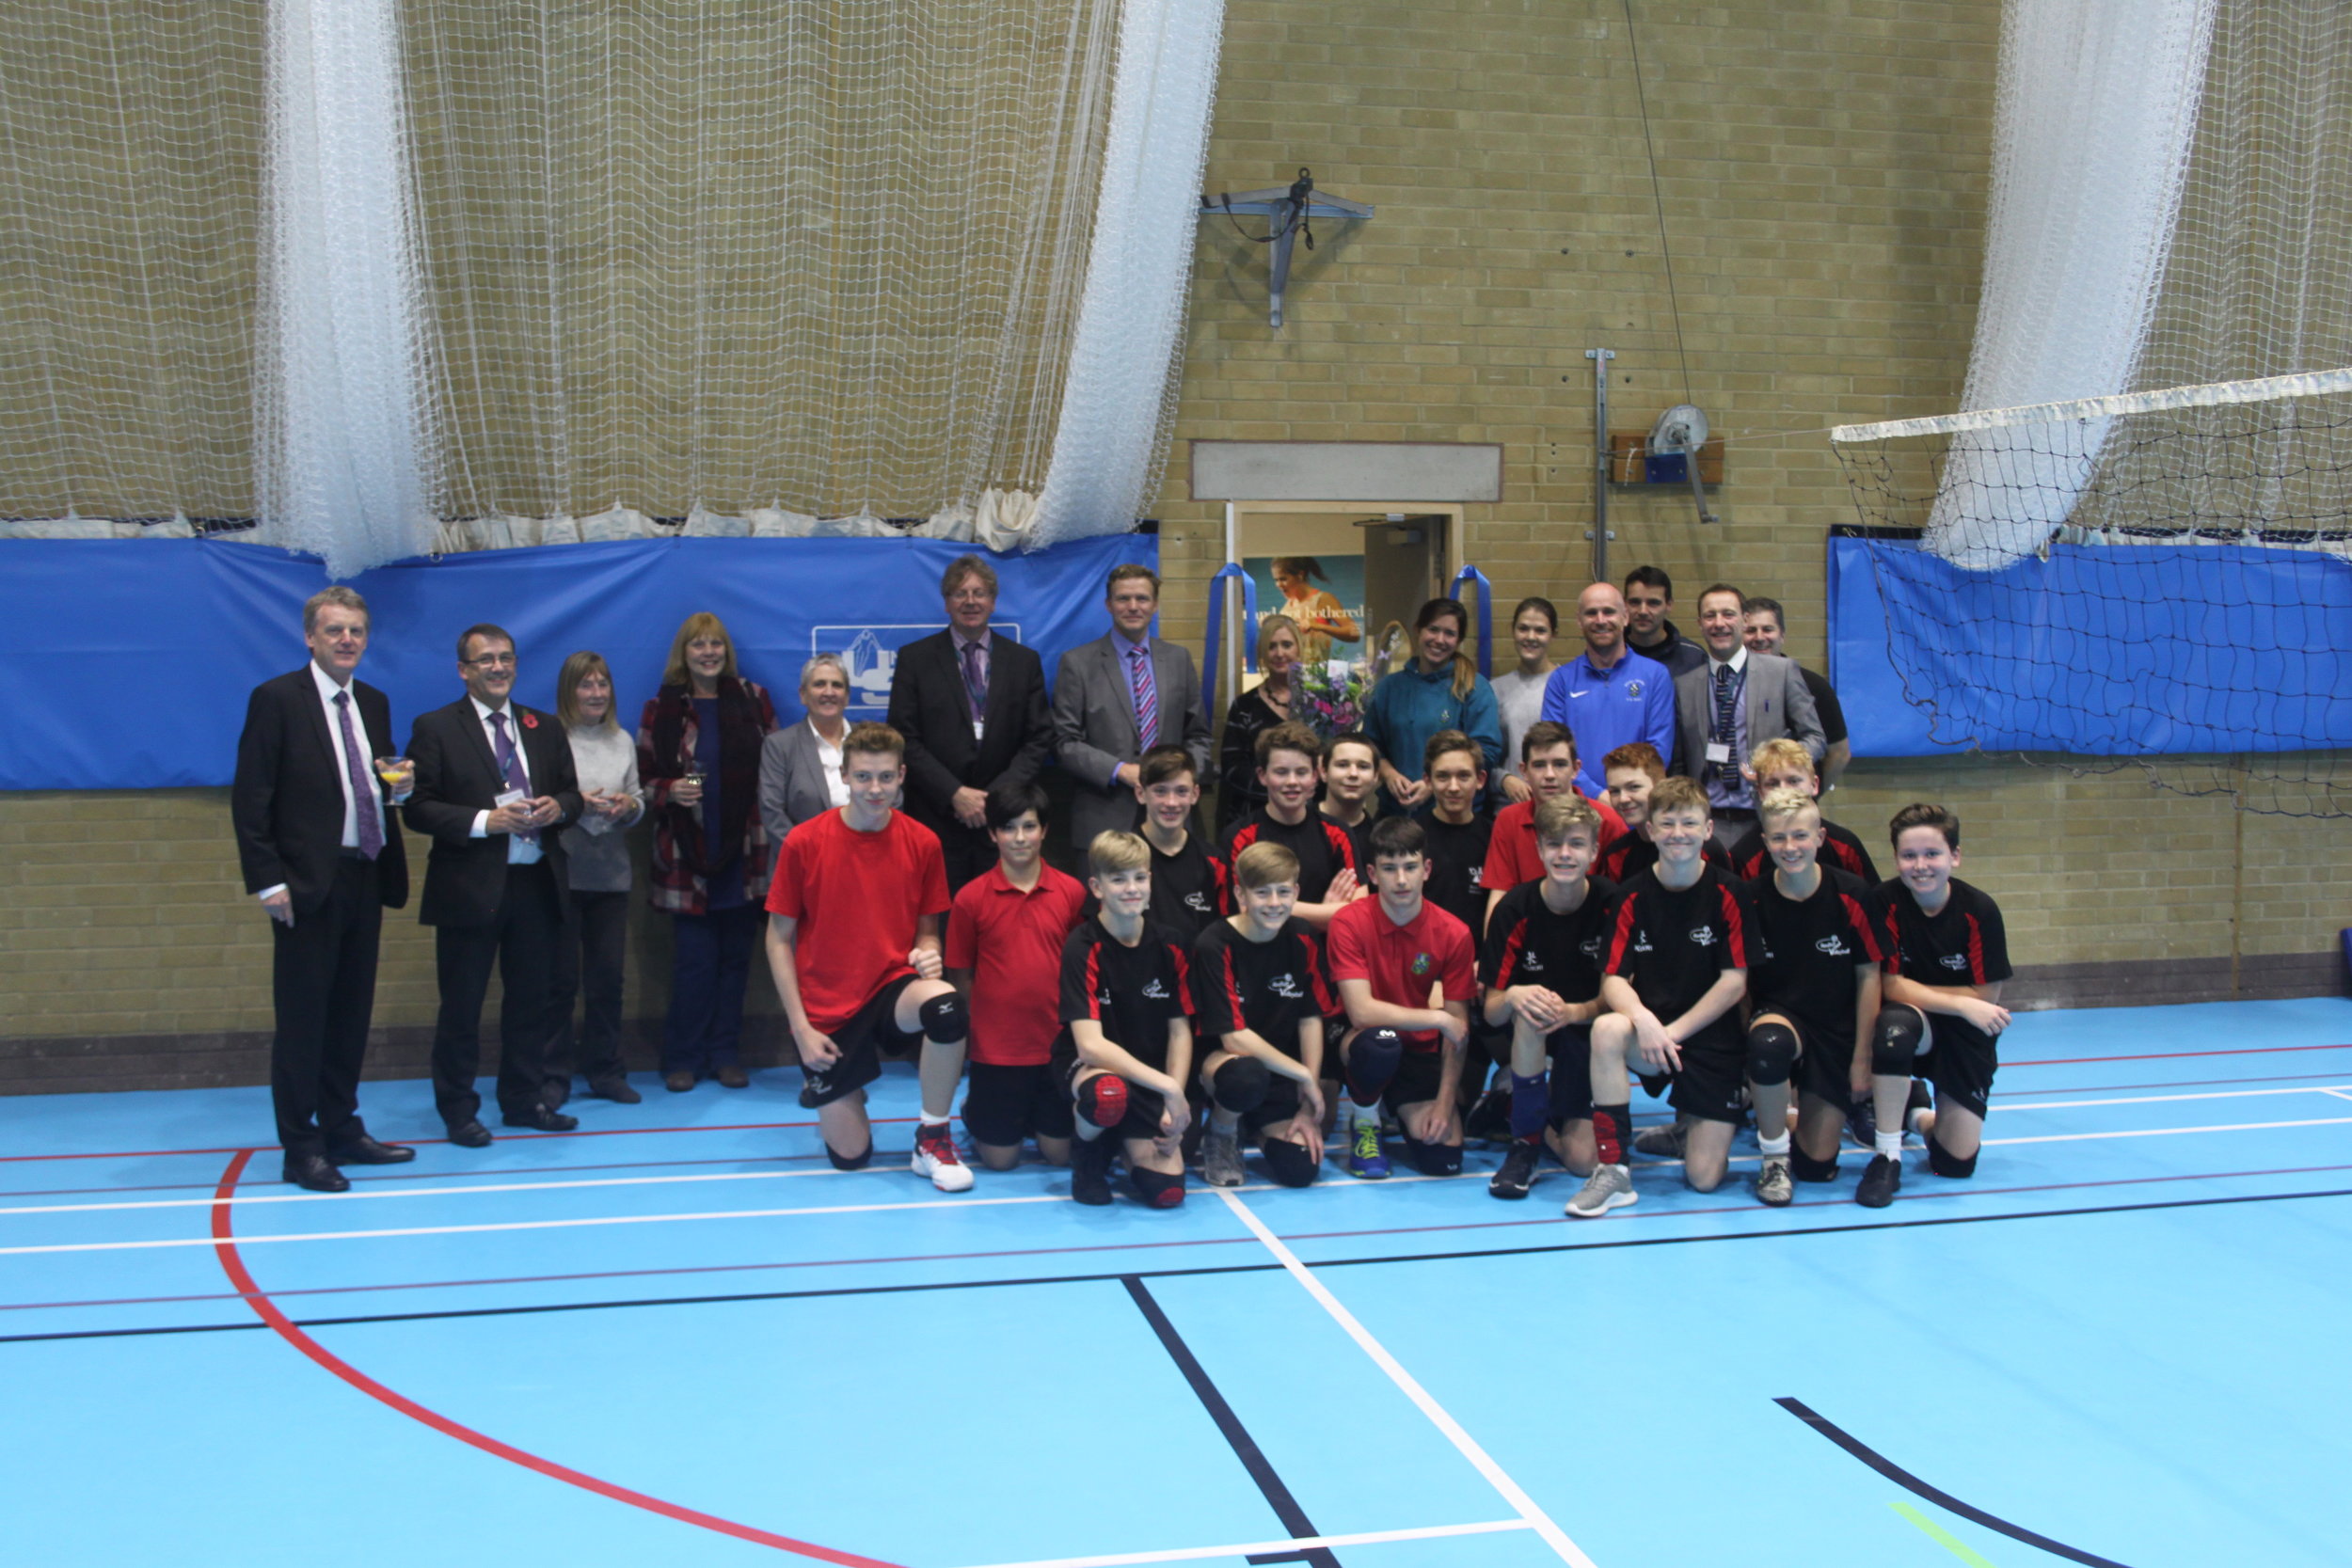 The opening of our new sports hall